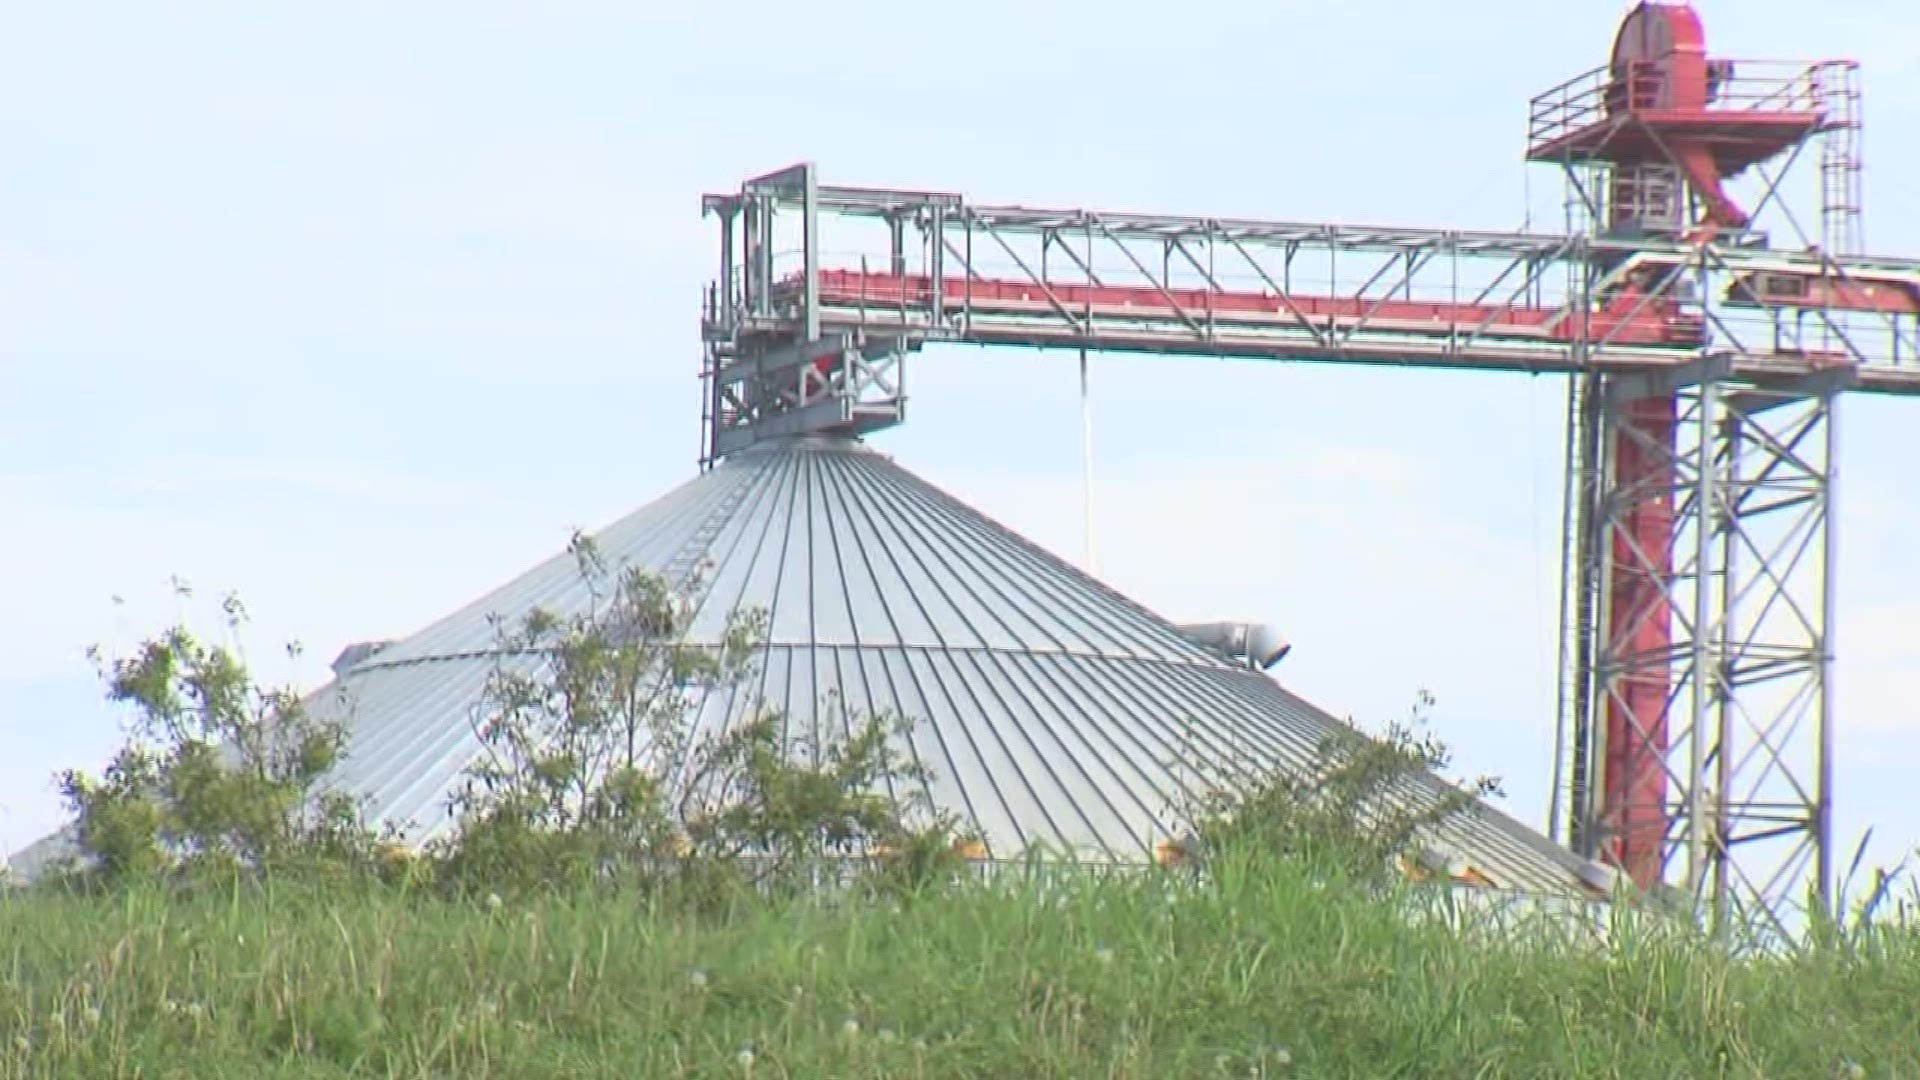 The city of Port Arthur is now planning to take legal action against the company responsible for those smoldering silos some say is causing health problems. 